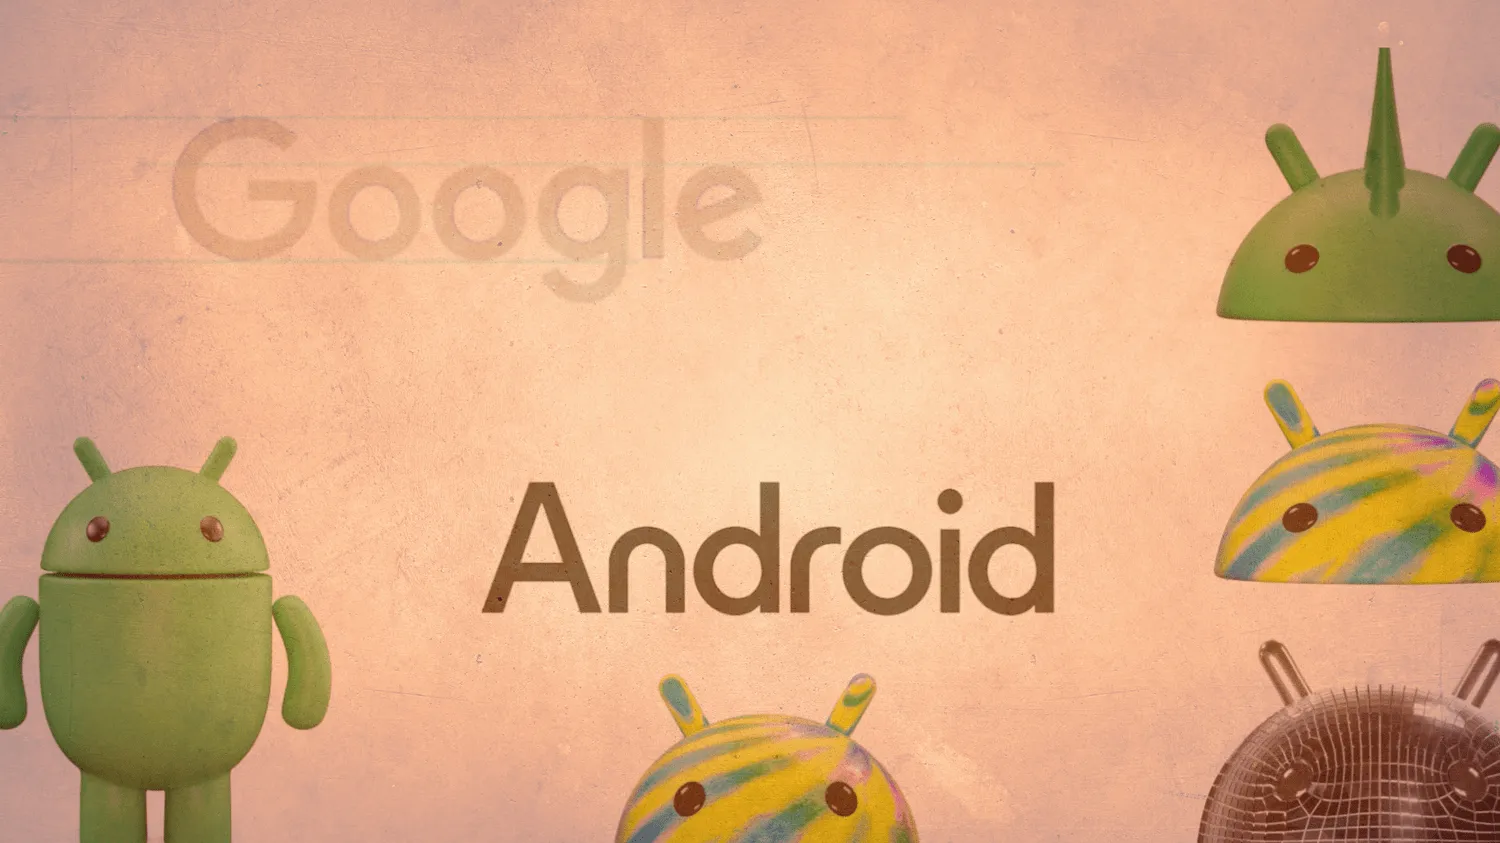 New 3D android logo